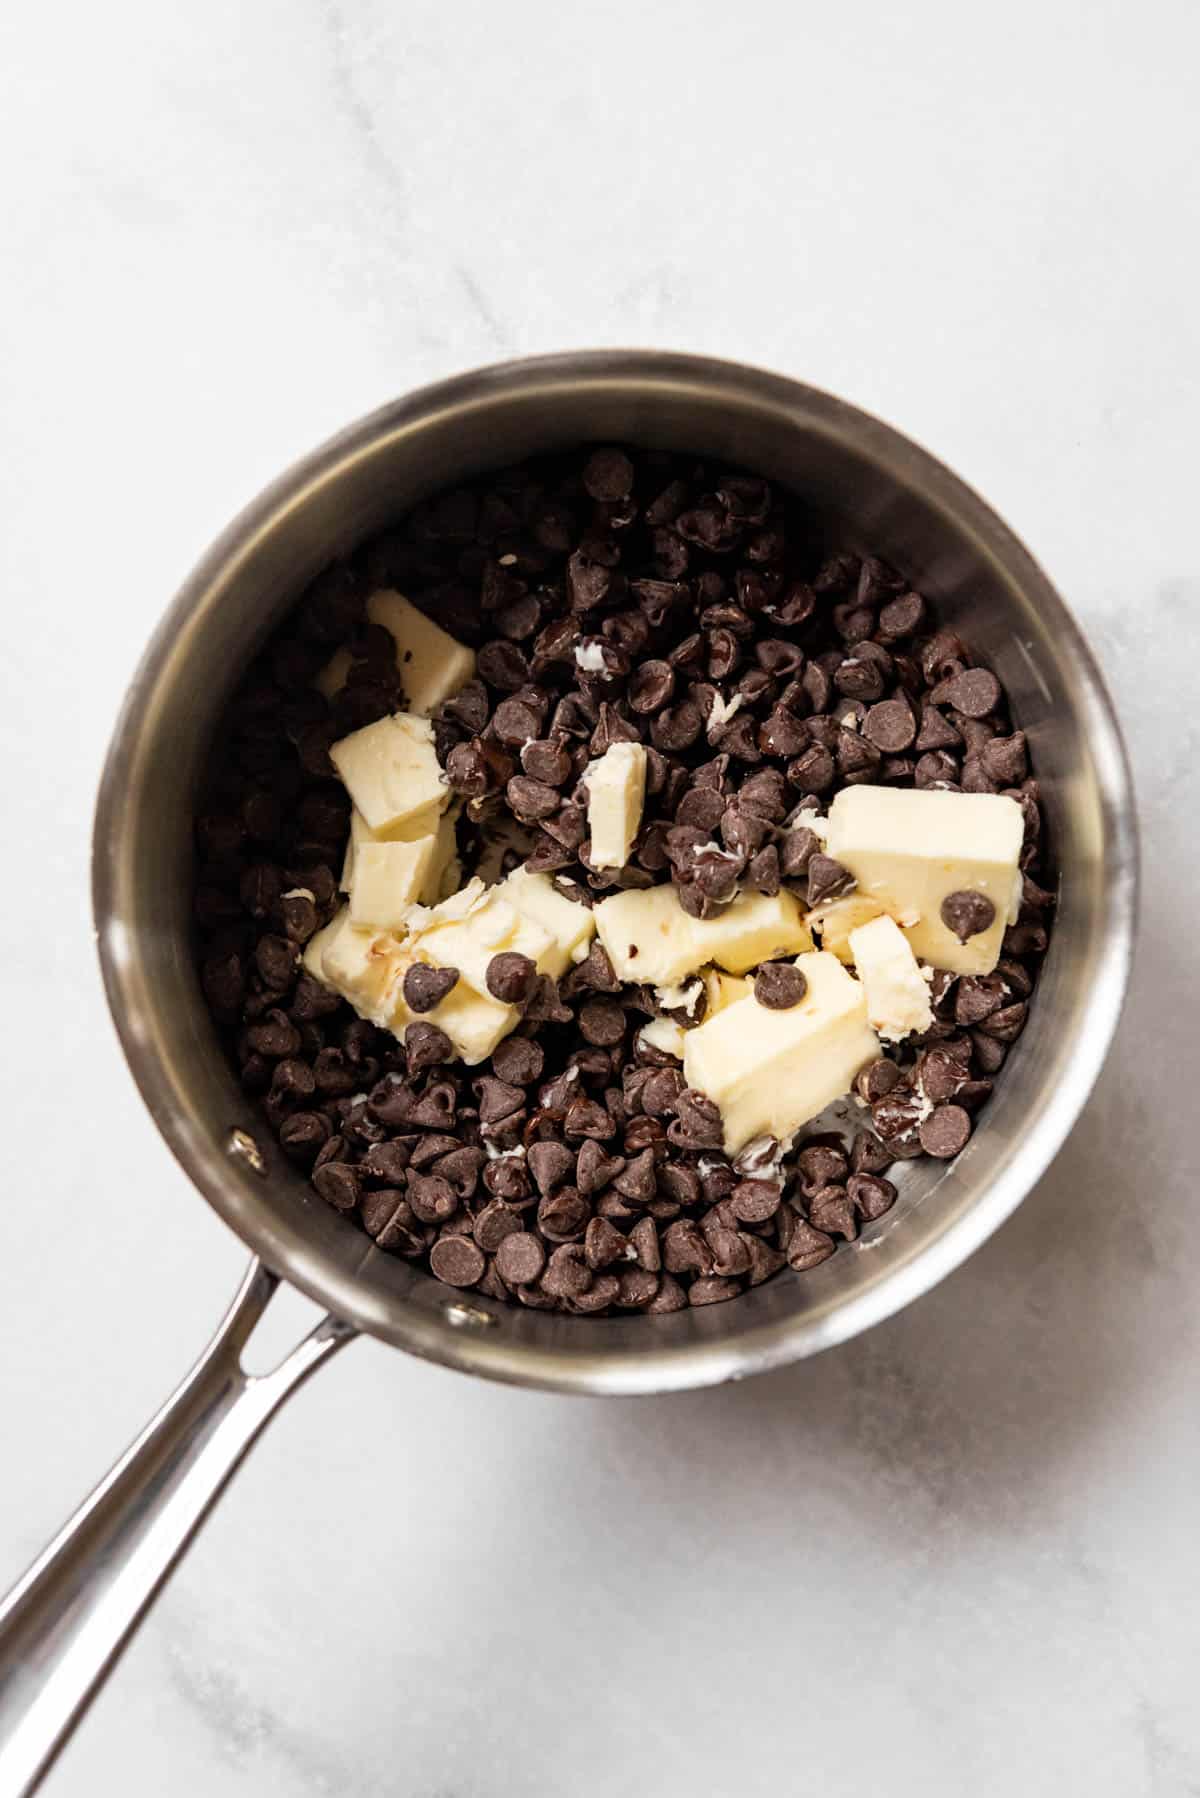 Butter and chocolate chips in a saucepan.